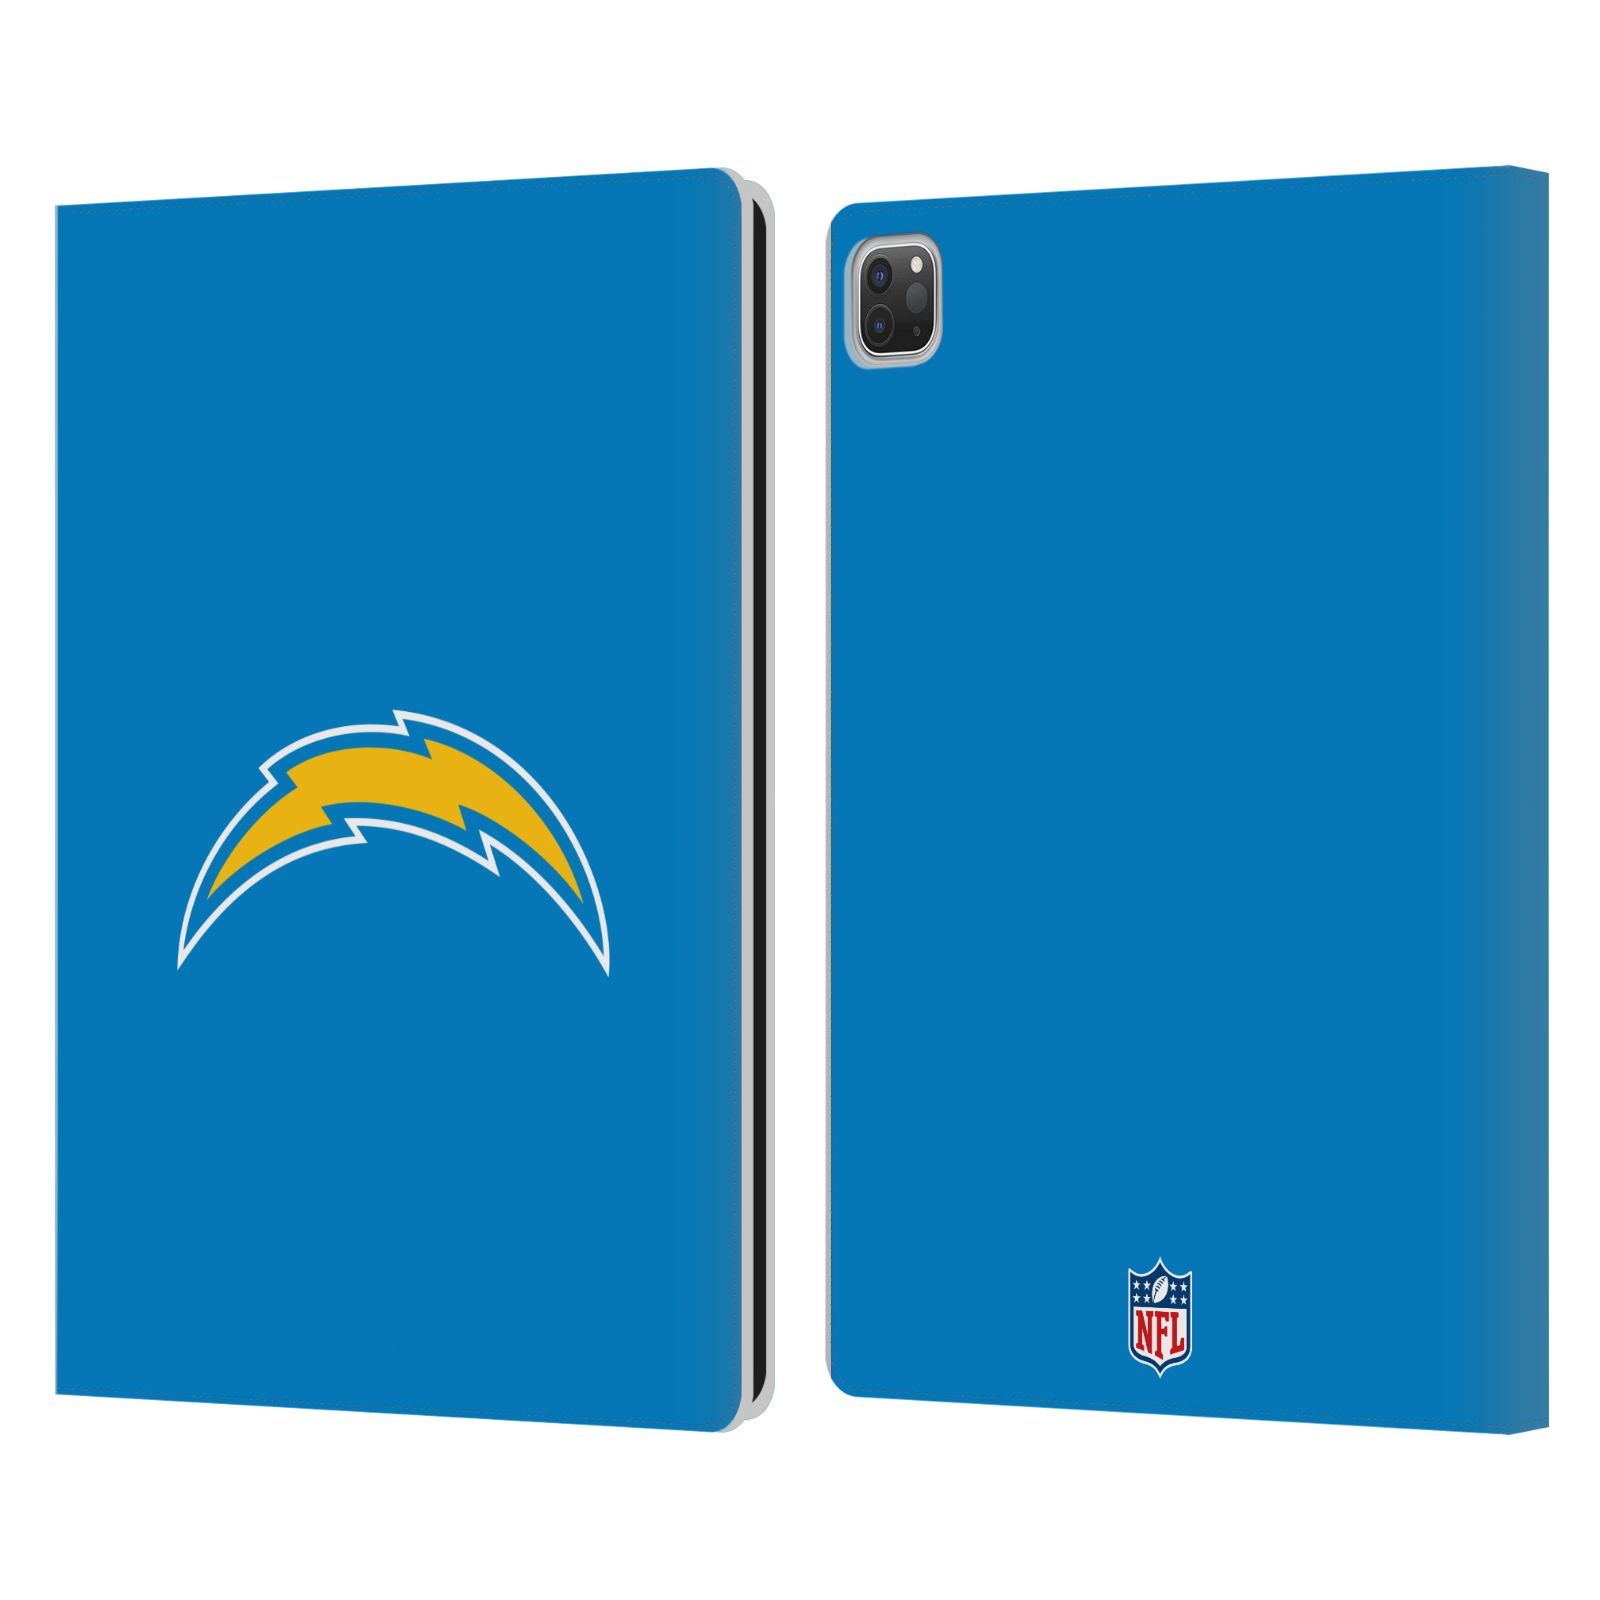 OFFICIAL NFL LOS ANGELES CHARGERS LOGO LEATHER BOOK WALLET CASE FOR APPLE iPAD